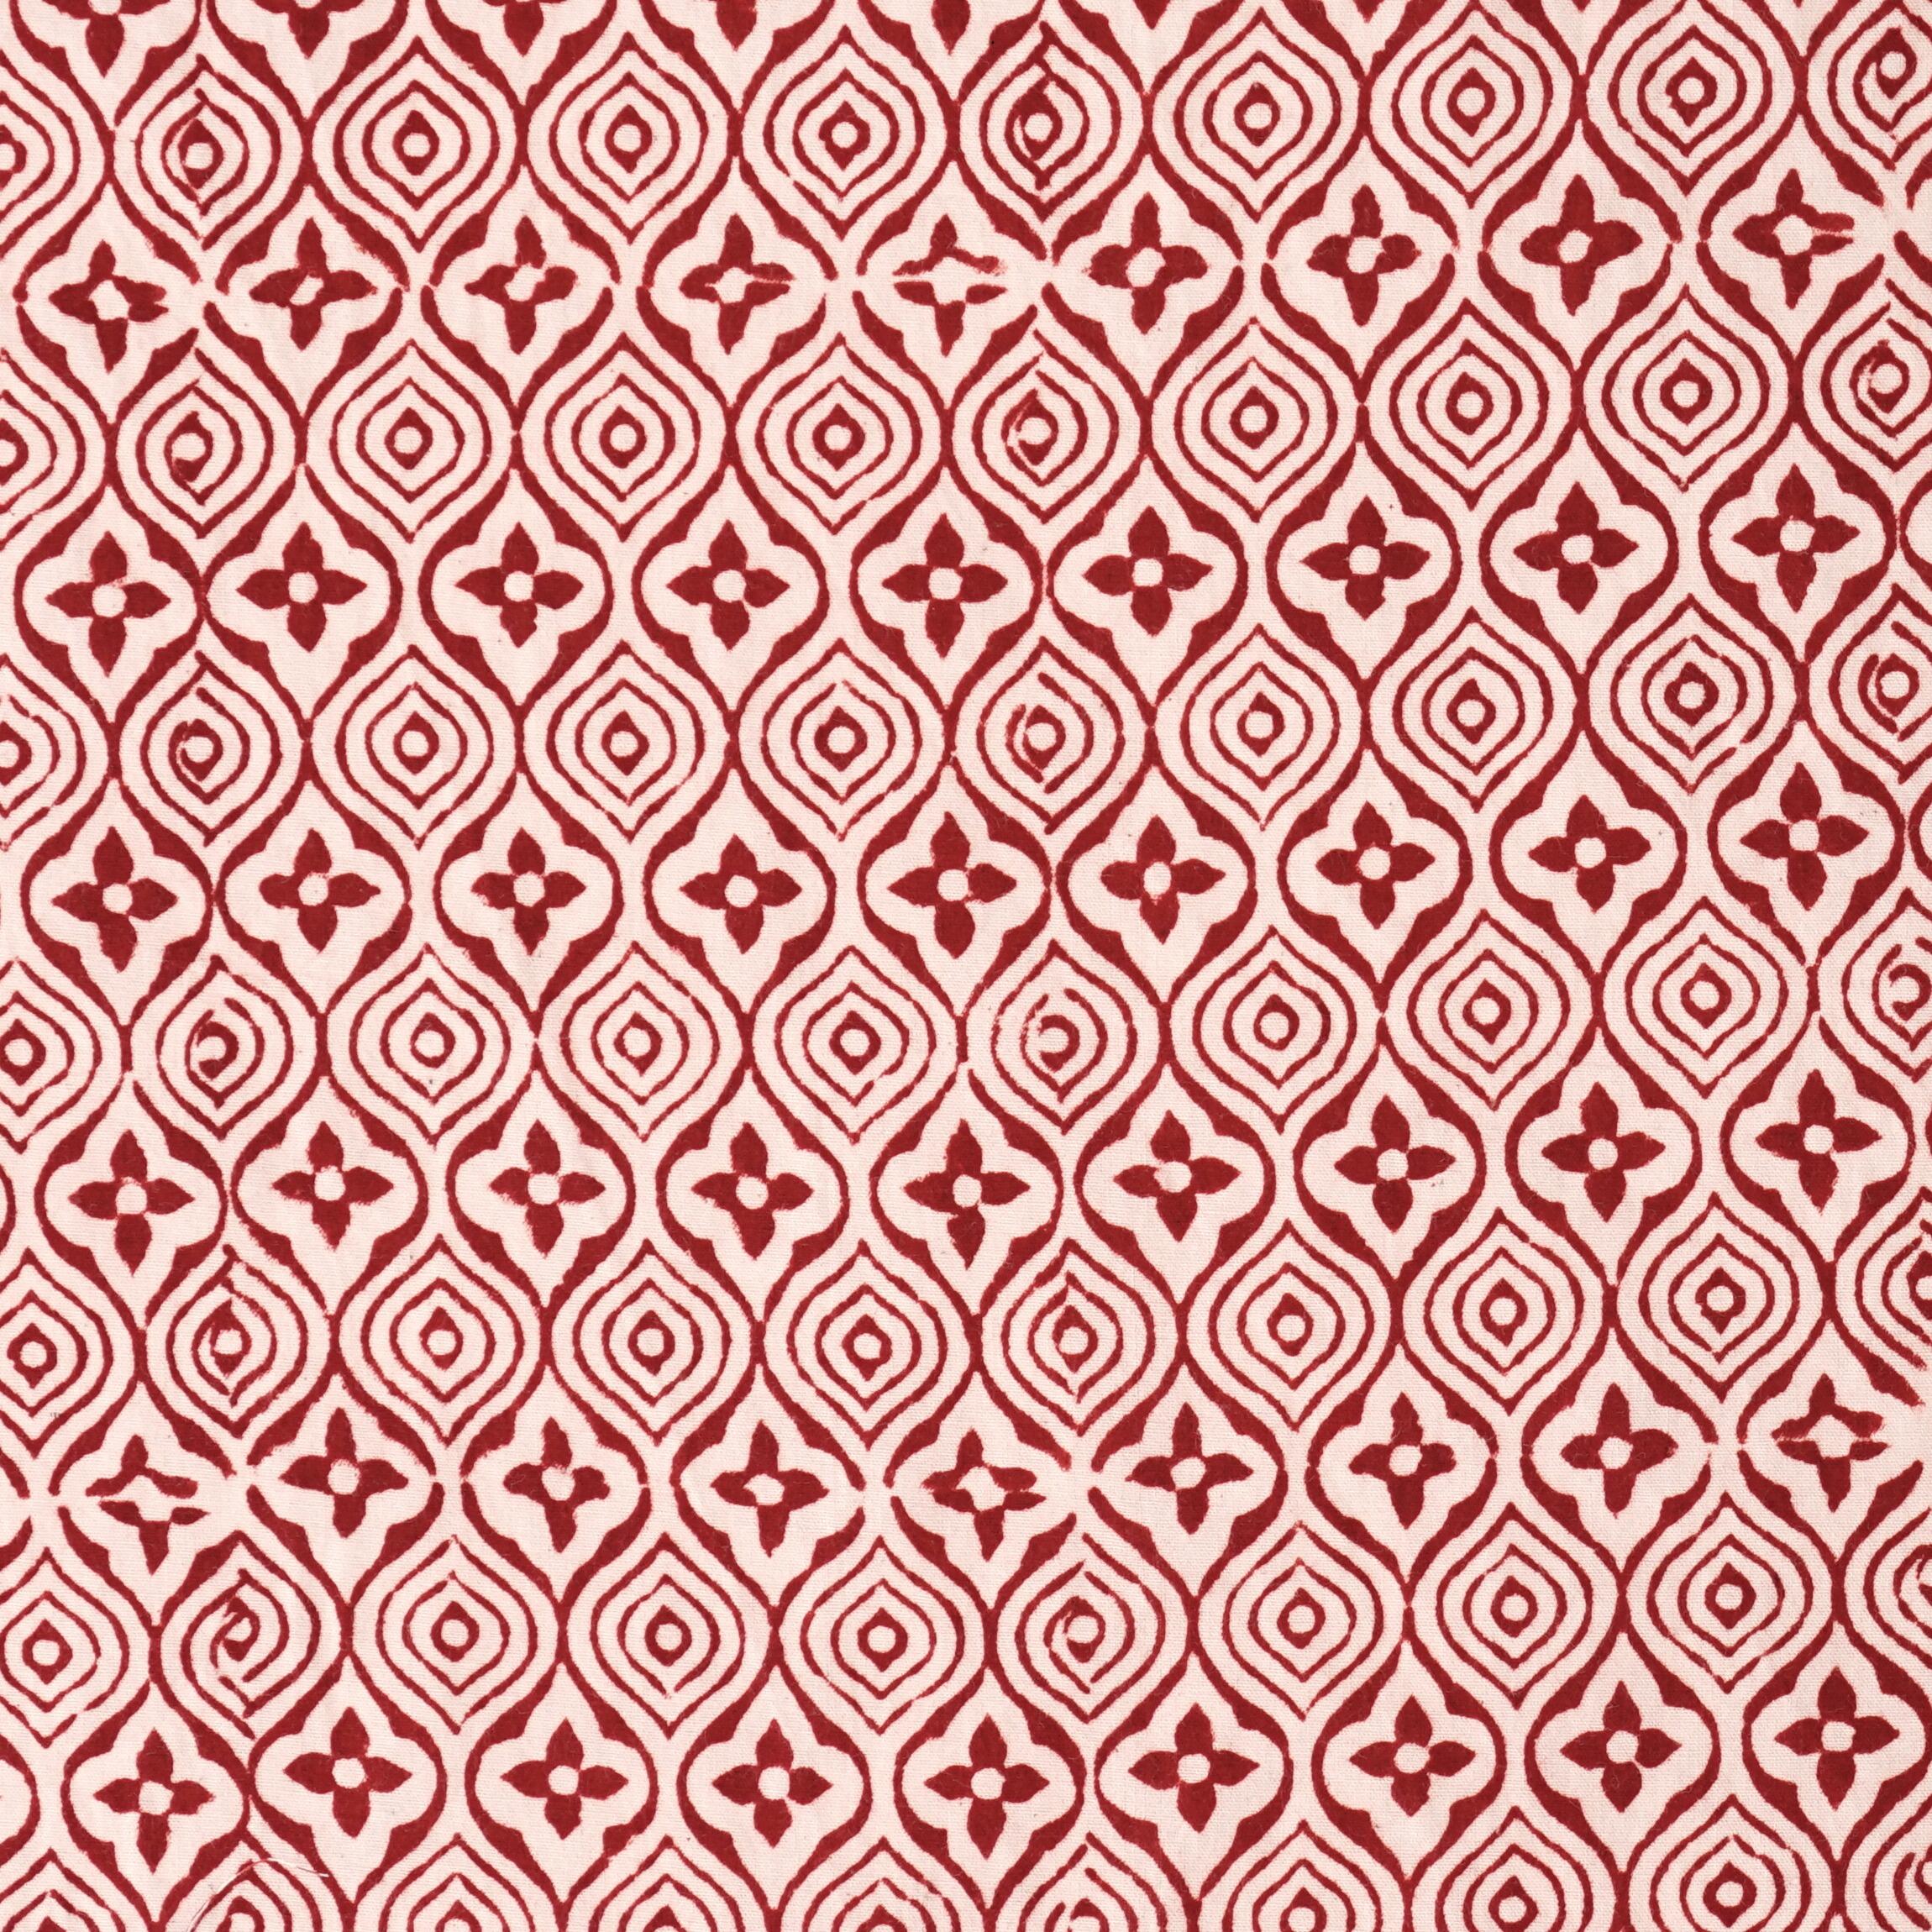 100% Block-Printed Cotton Fabric From India - Bagh Method - Alizarin Red Turkish Delight Print - Flat